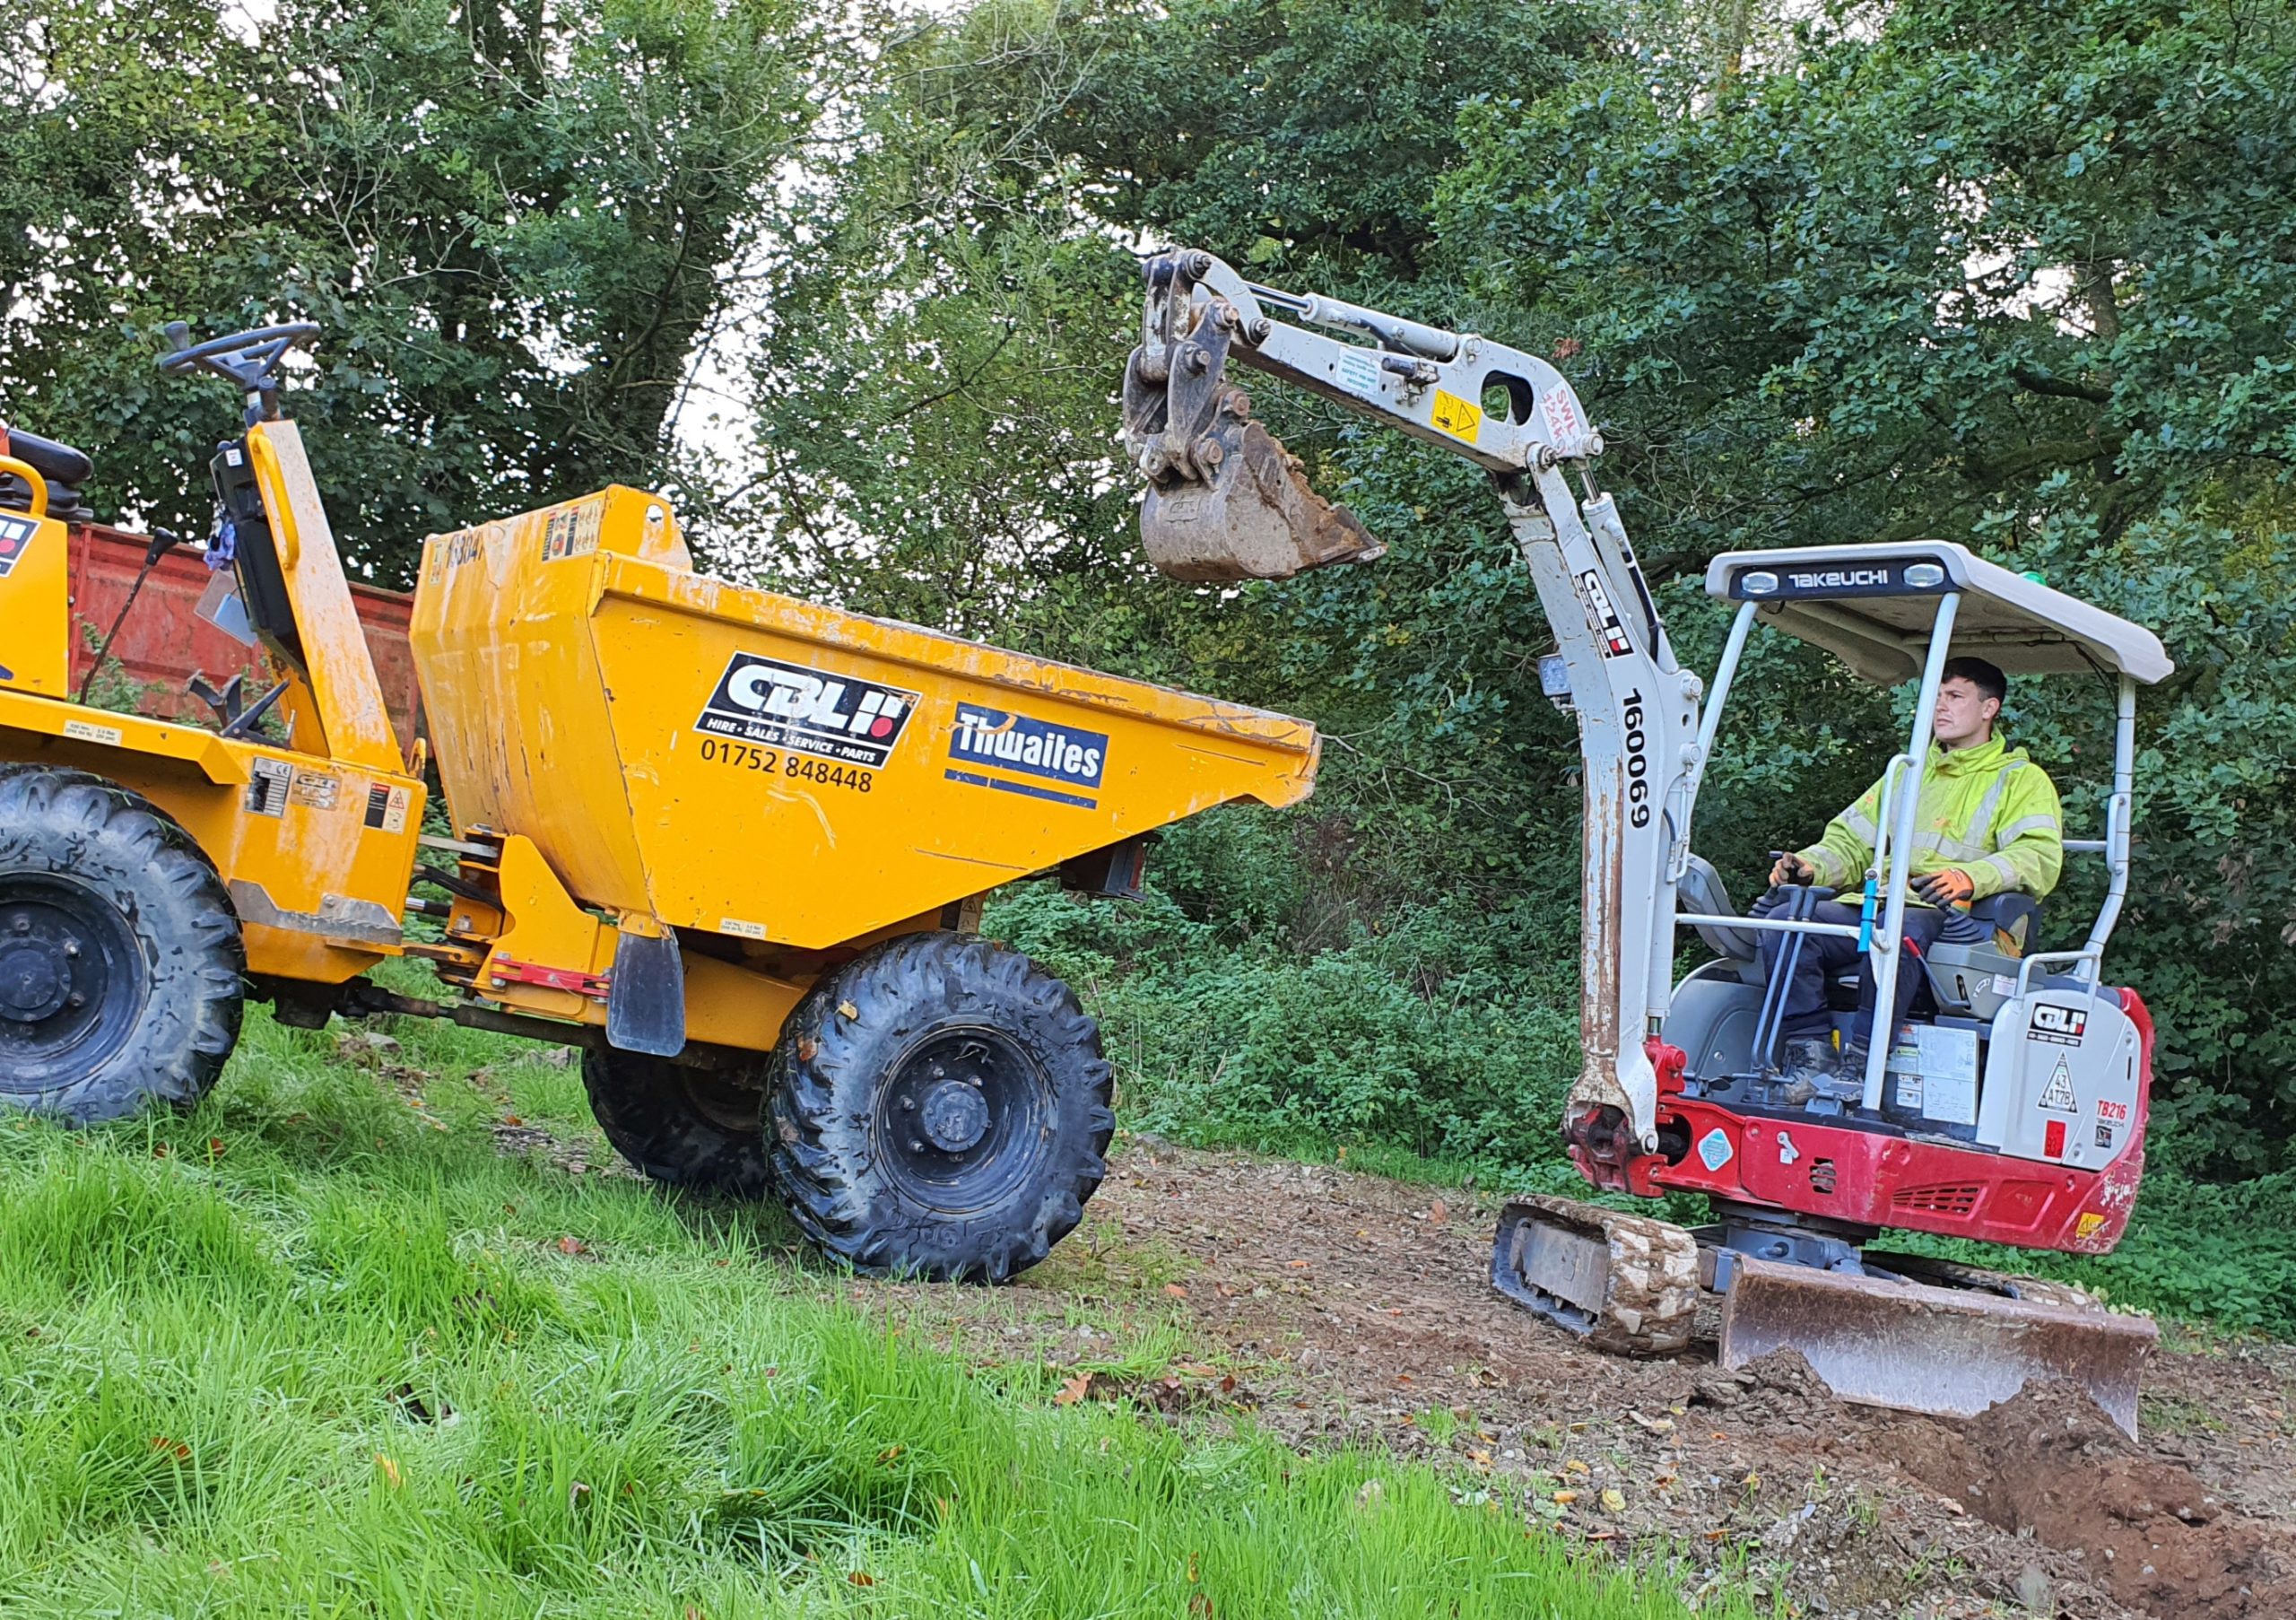 small excavator loading a 3t dumper in a field with trees in background